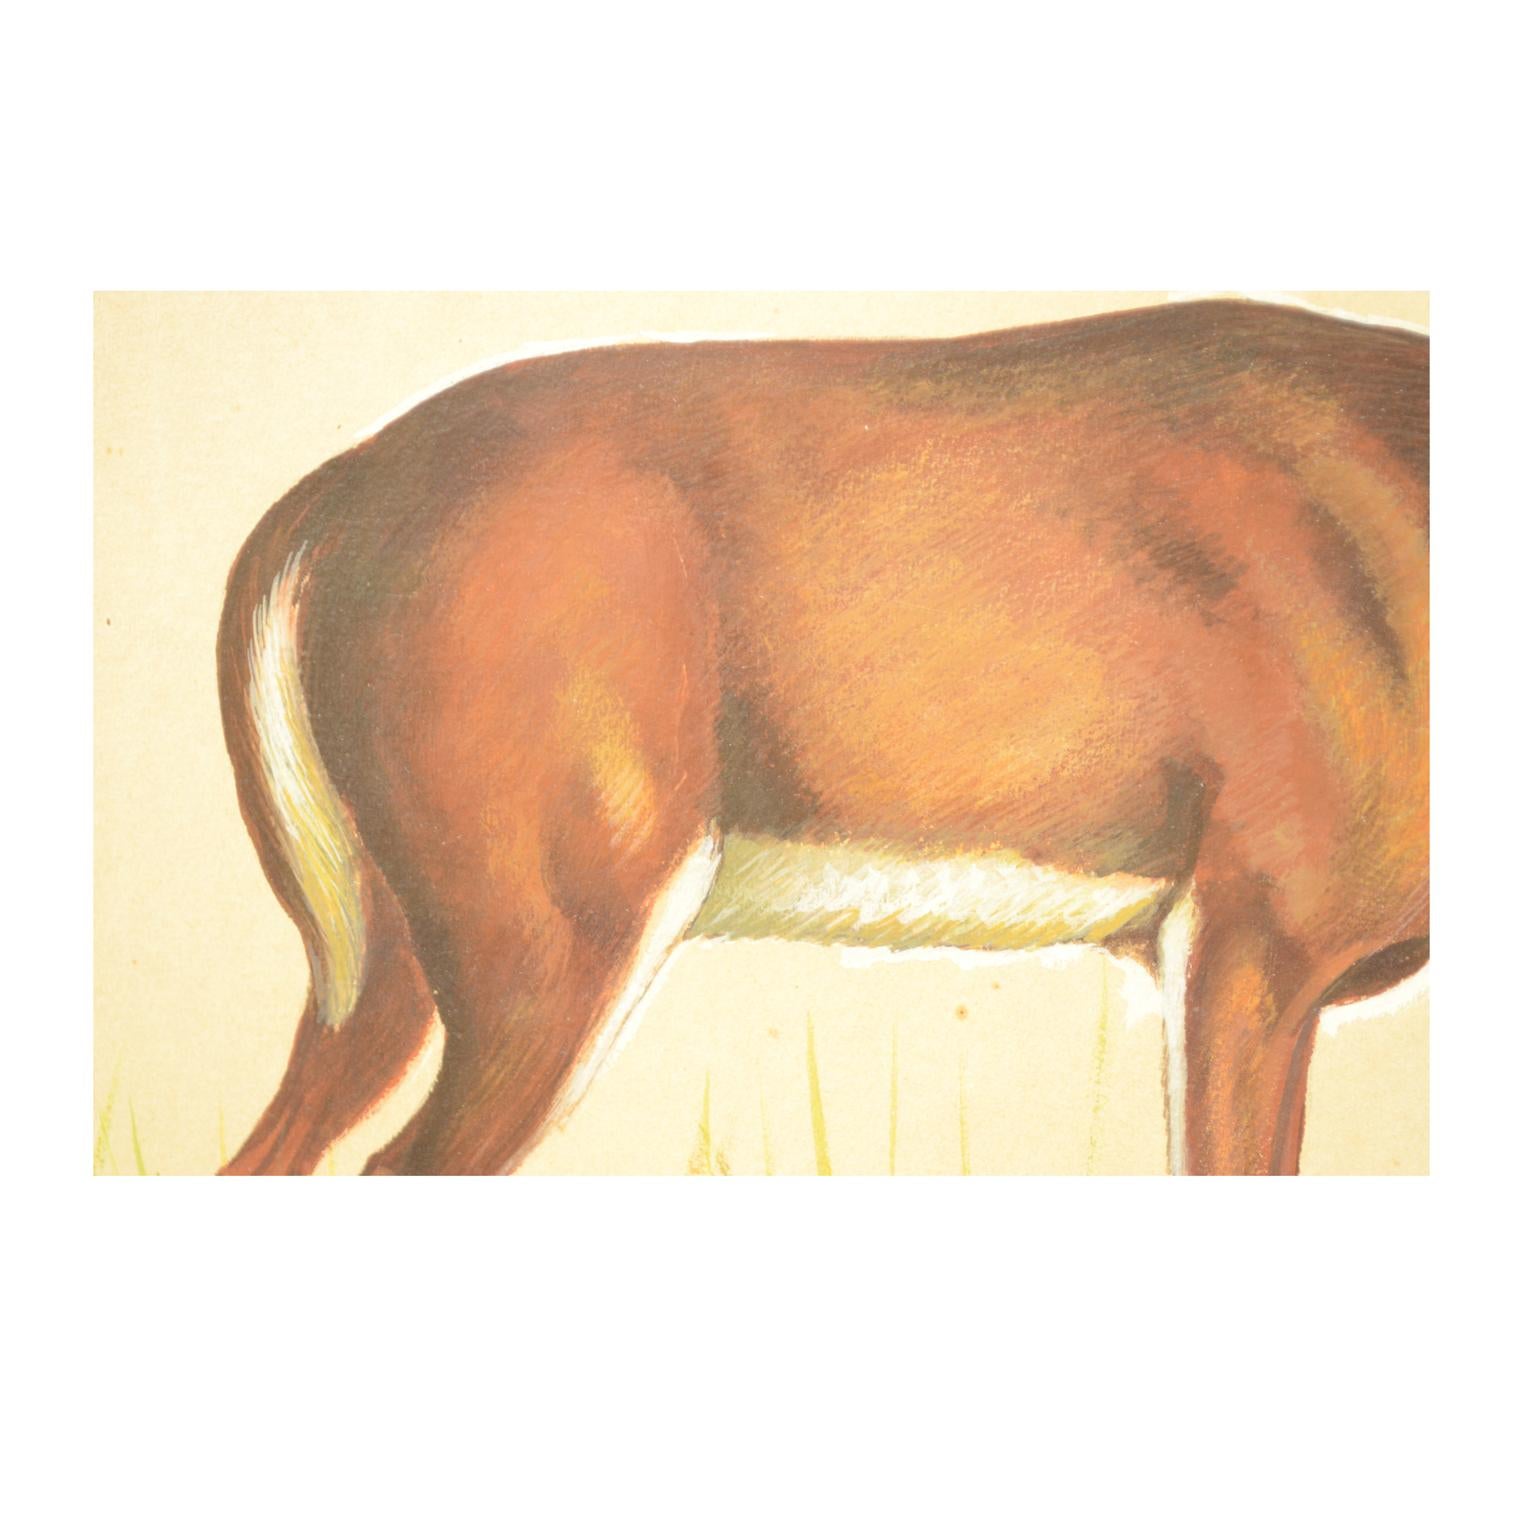 Sketch of a hind Korea 1970s Acrylic on Paper for an Animals Encyclopedia For Sale 1